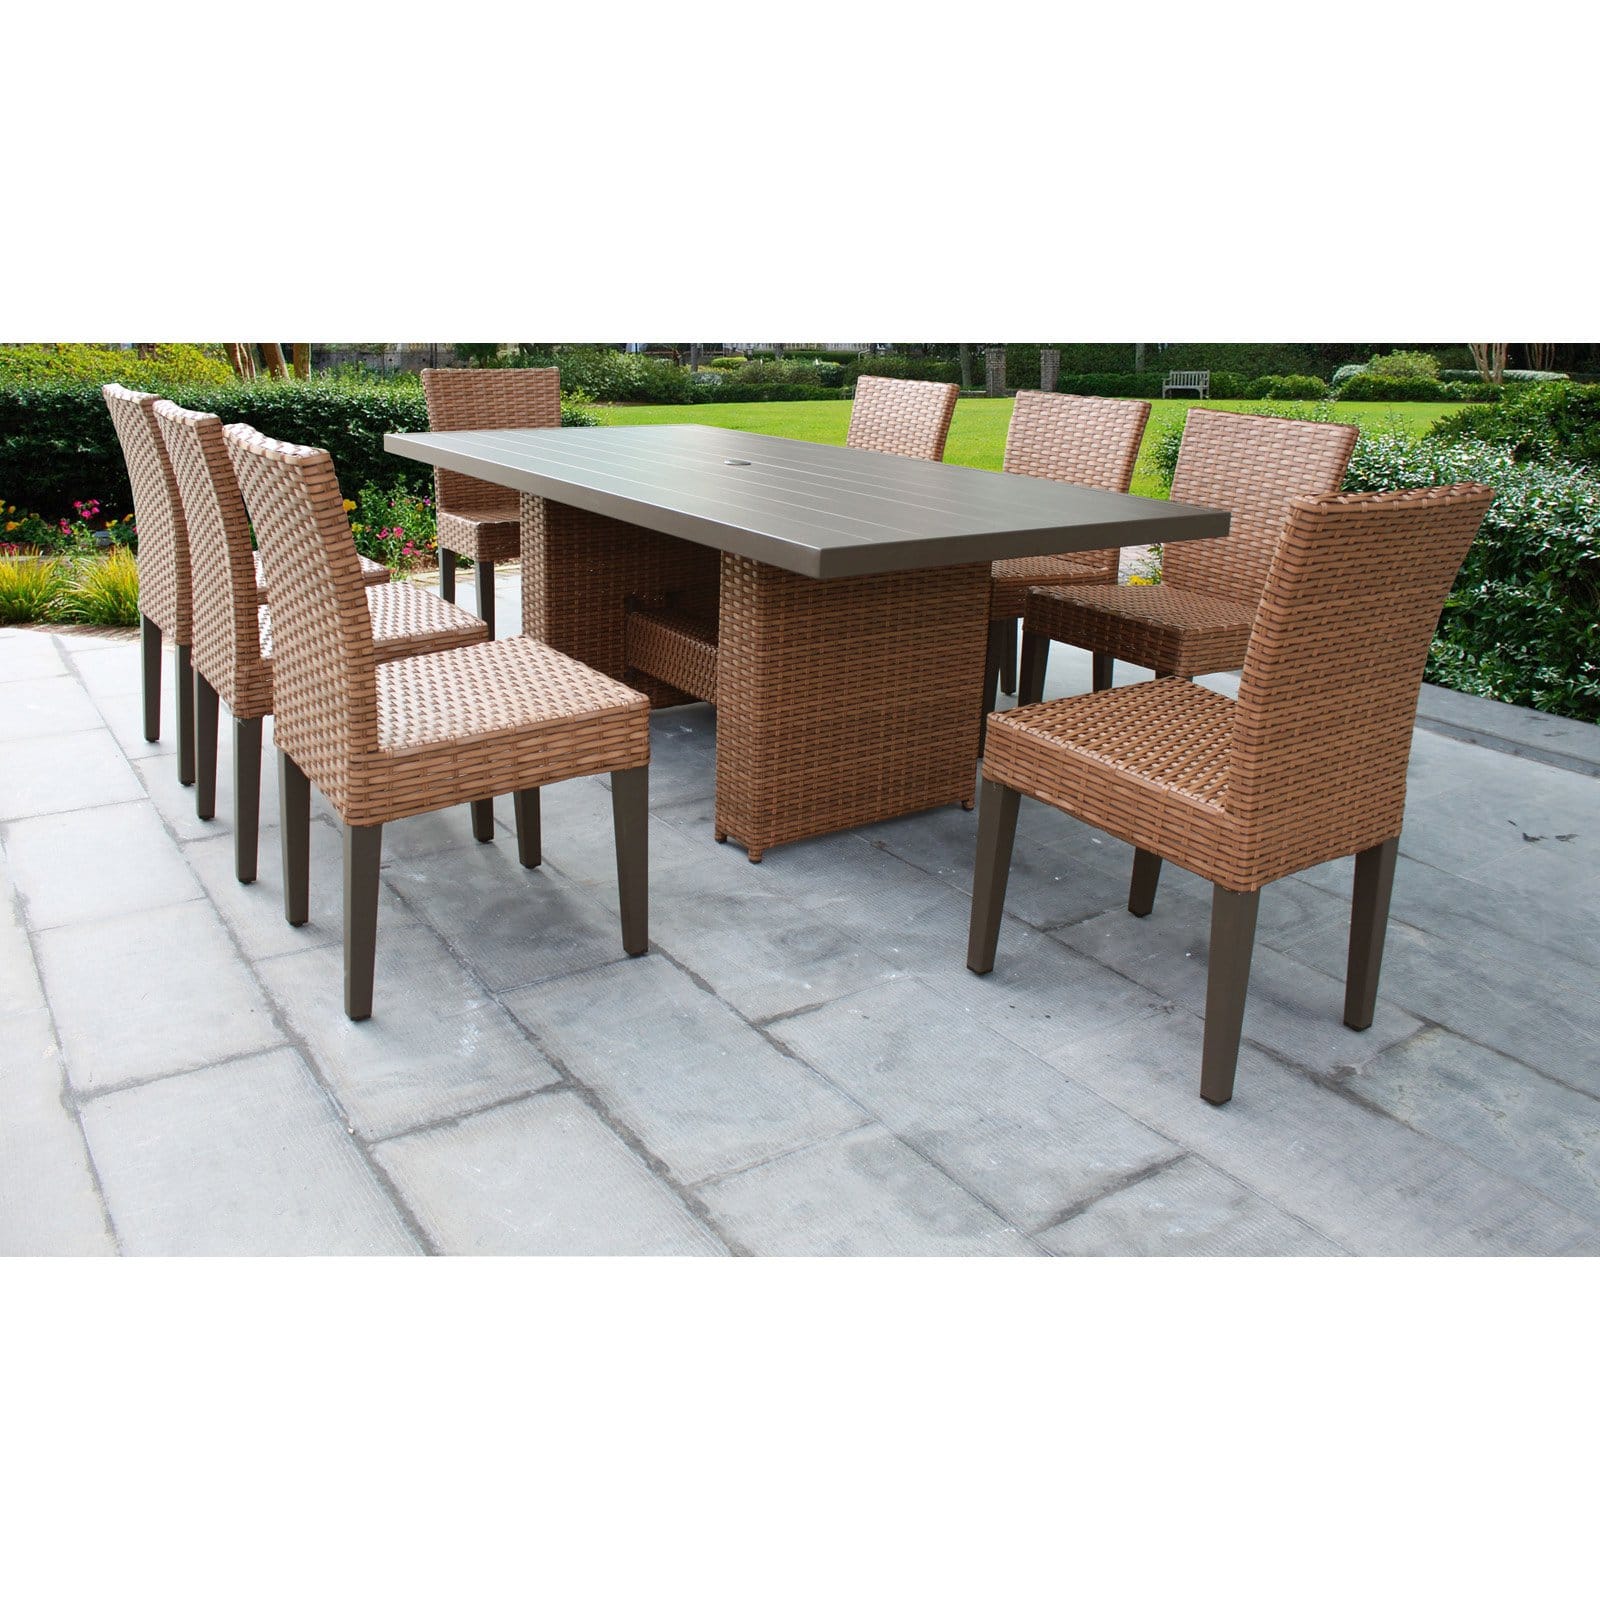 TK Classics Laguna Wicker 9 Piece Patio Dining Set with Armless Chairs - image 2 of 3